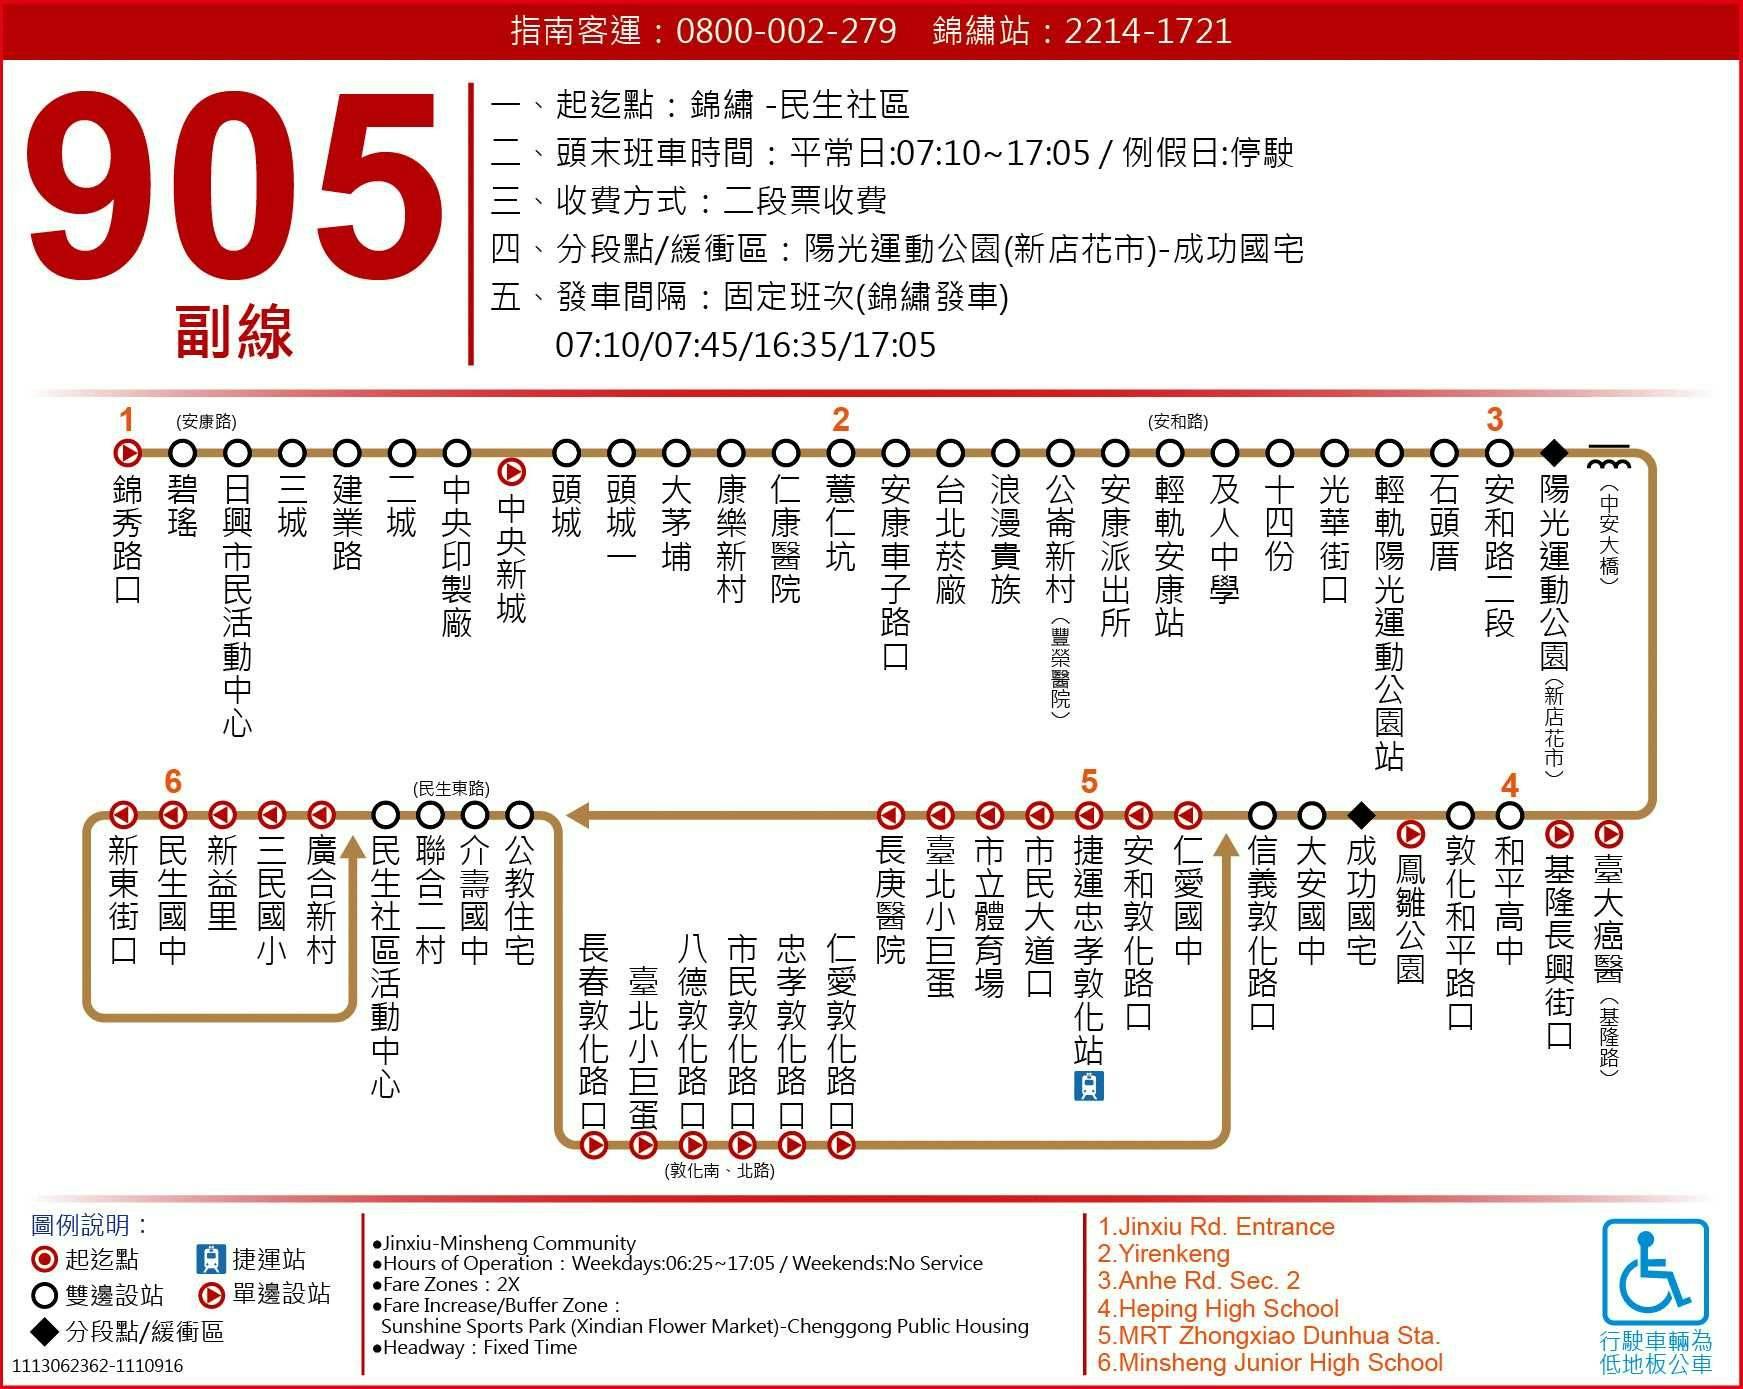 905SubRoute Map-台北市 Bus